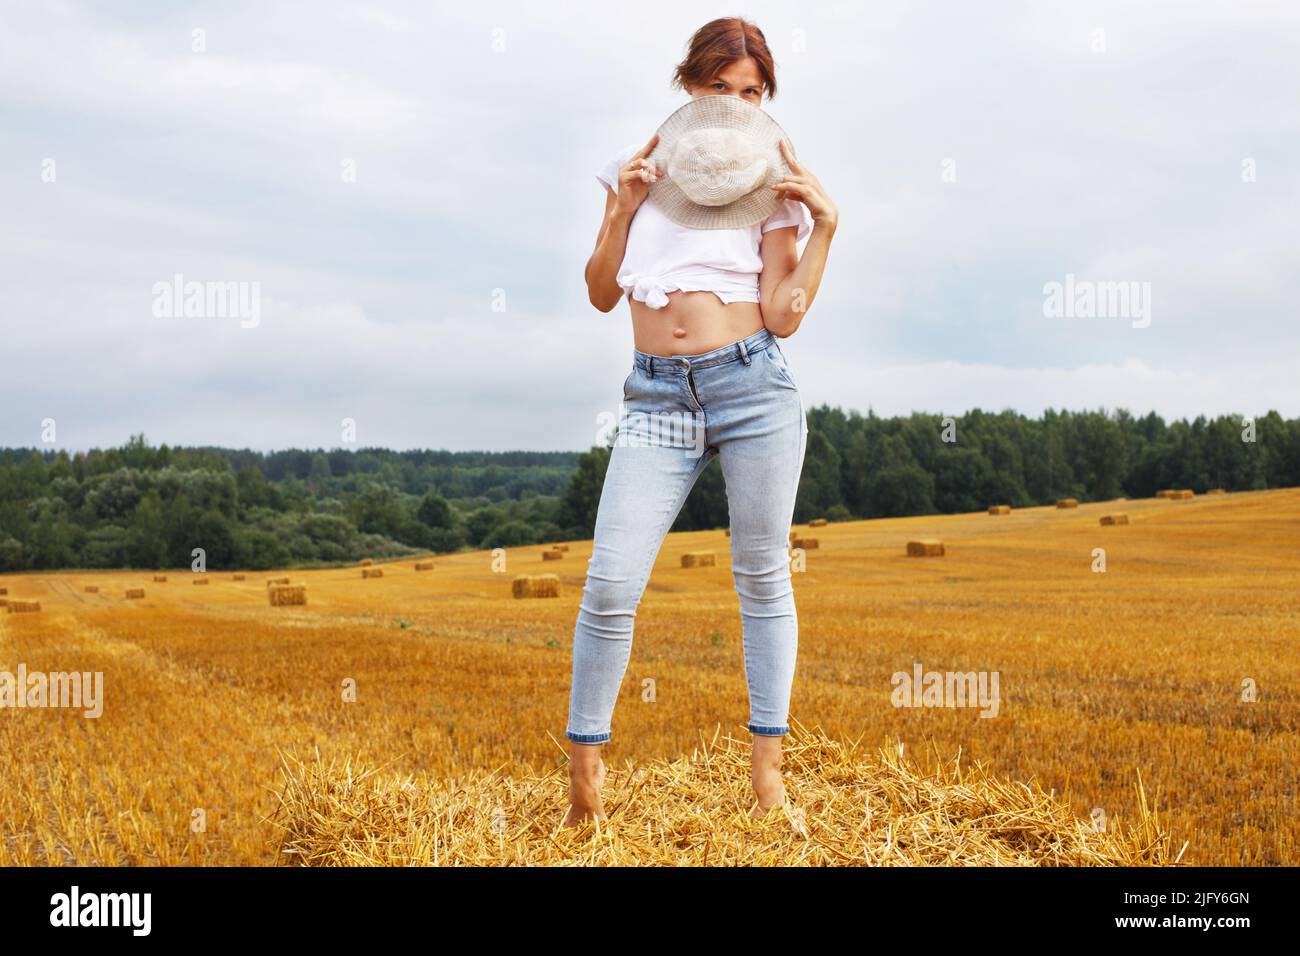 barefoot girl in straw hat stands on a haystack on a bale in the agricultural field after harvesting. Stock Photo